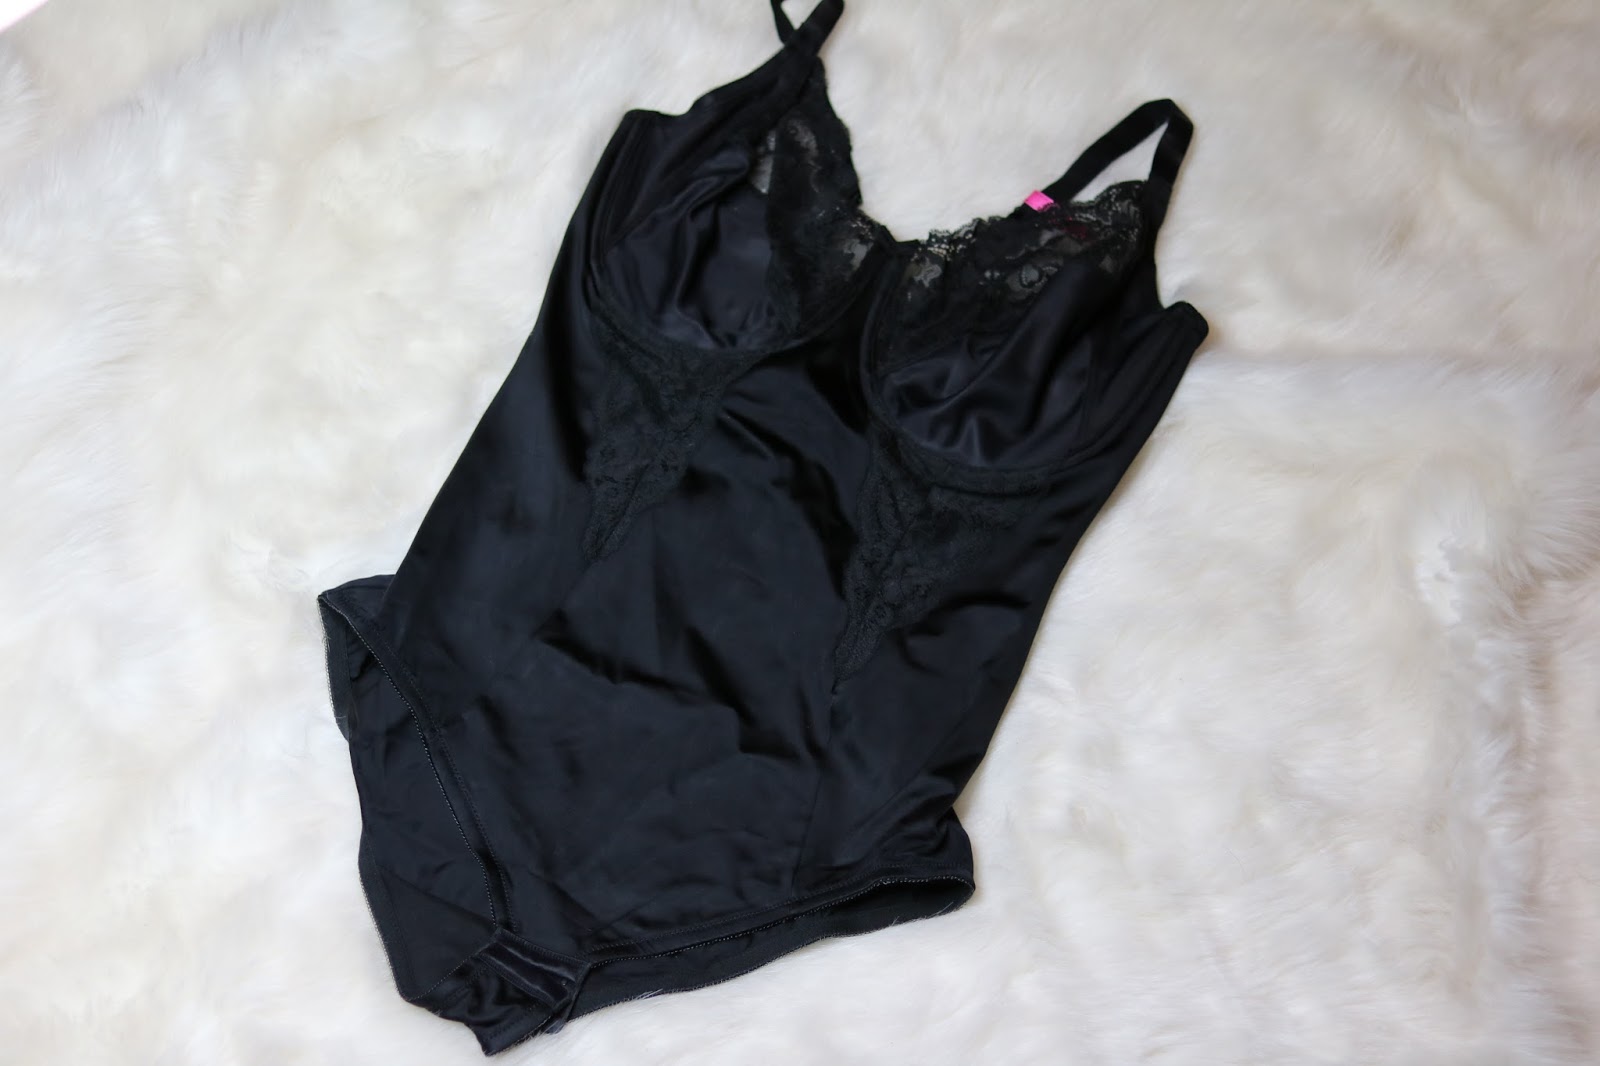 Solving My Shapewear Problems With Kohl's